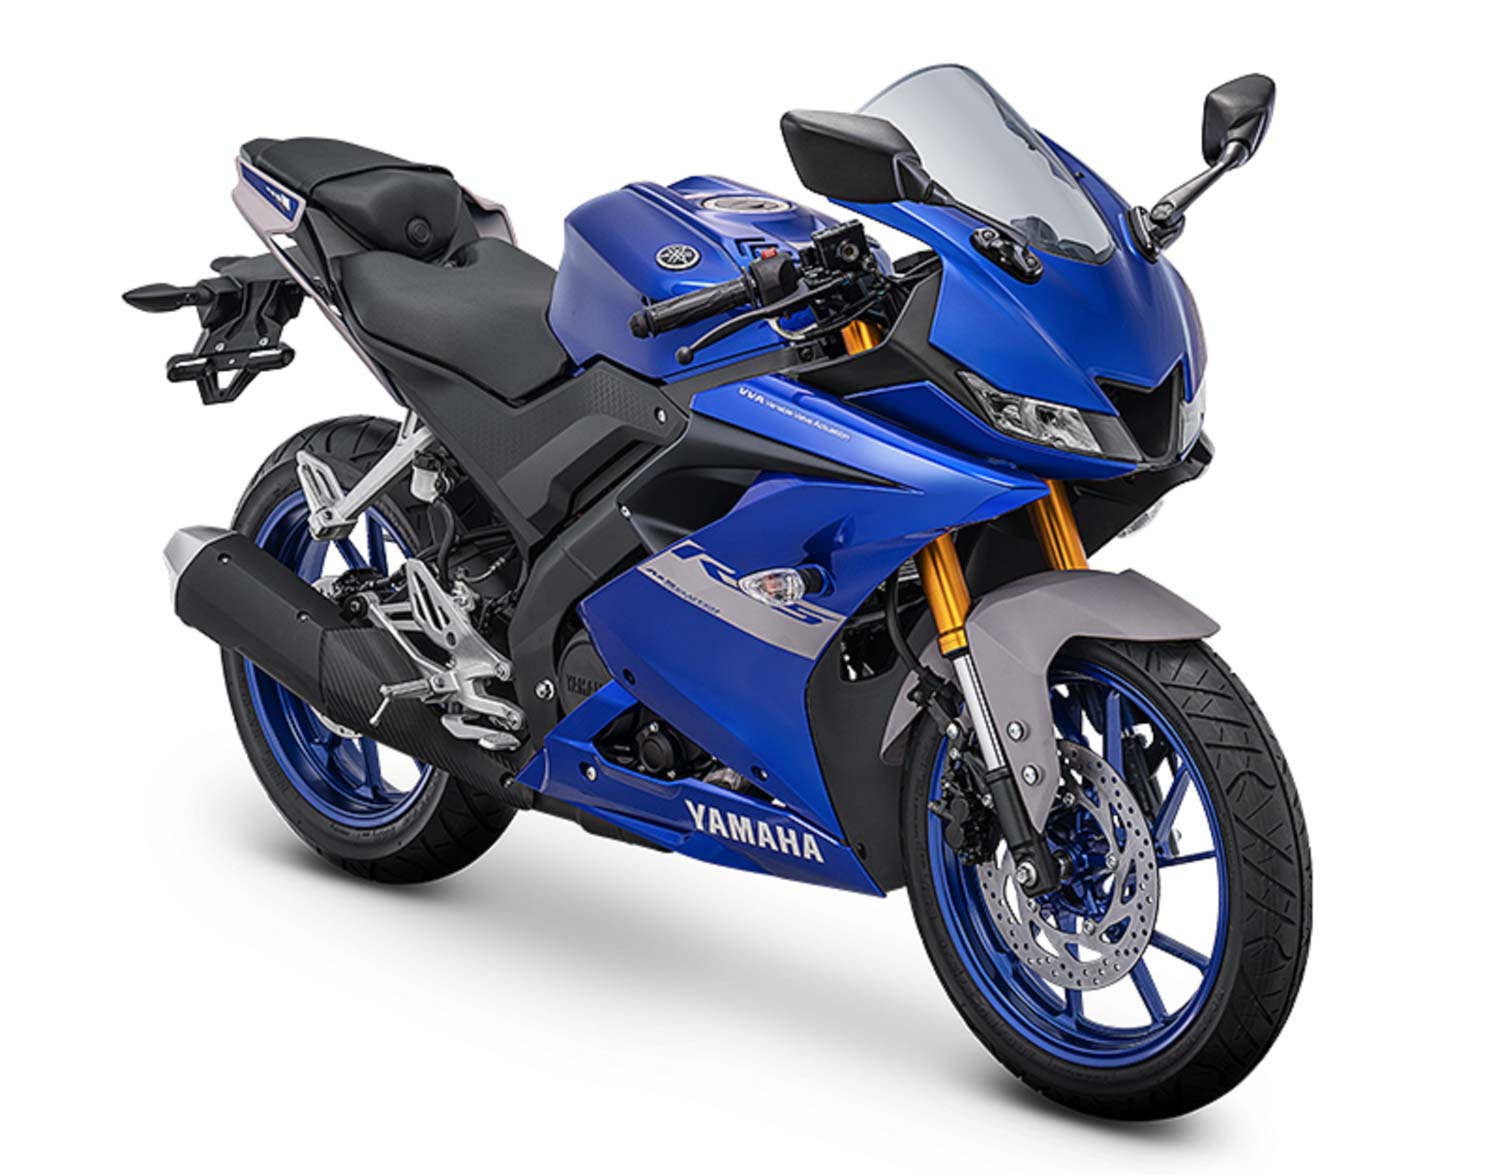 2021 Yamaha R15 V3 Launched With New Colour Options